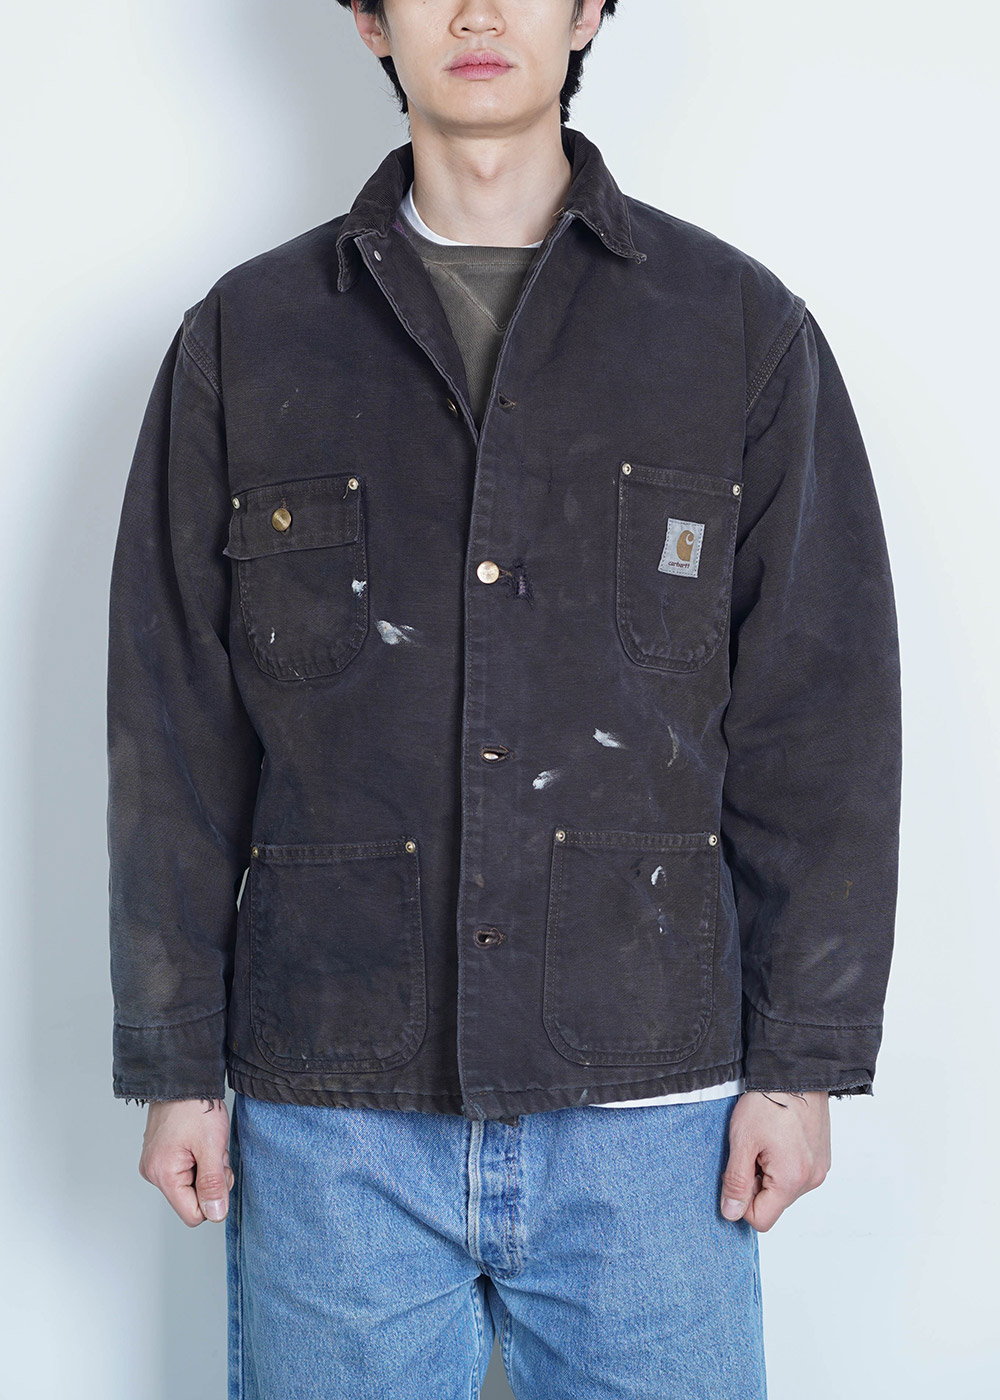 reproduction 047 / carhartt (Overdyed)